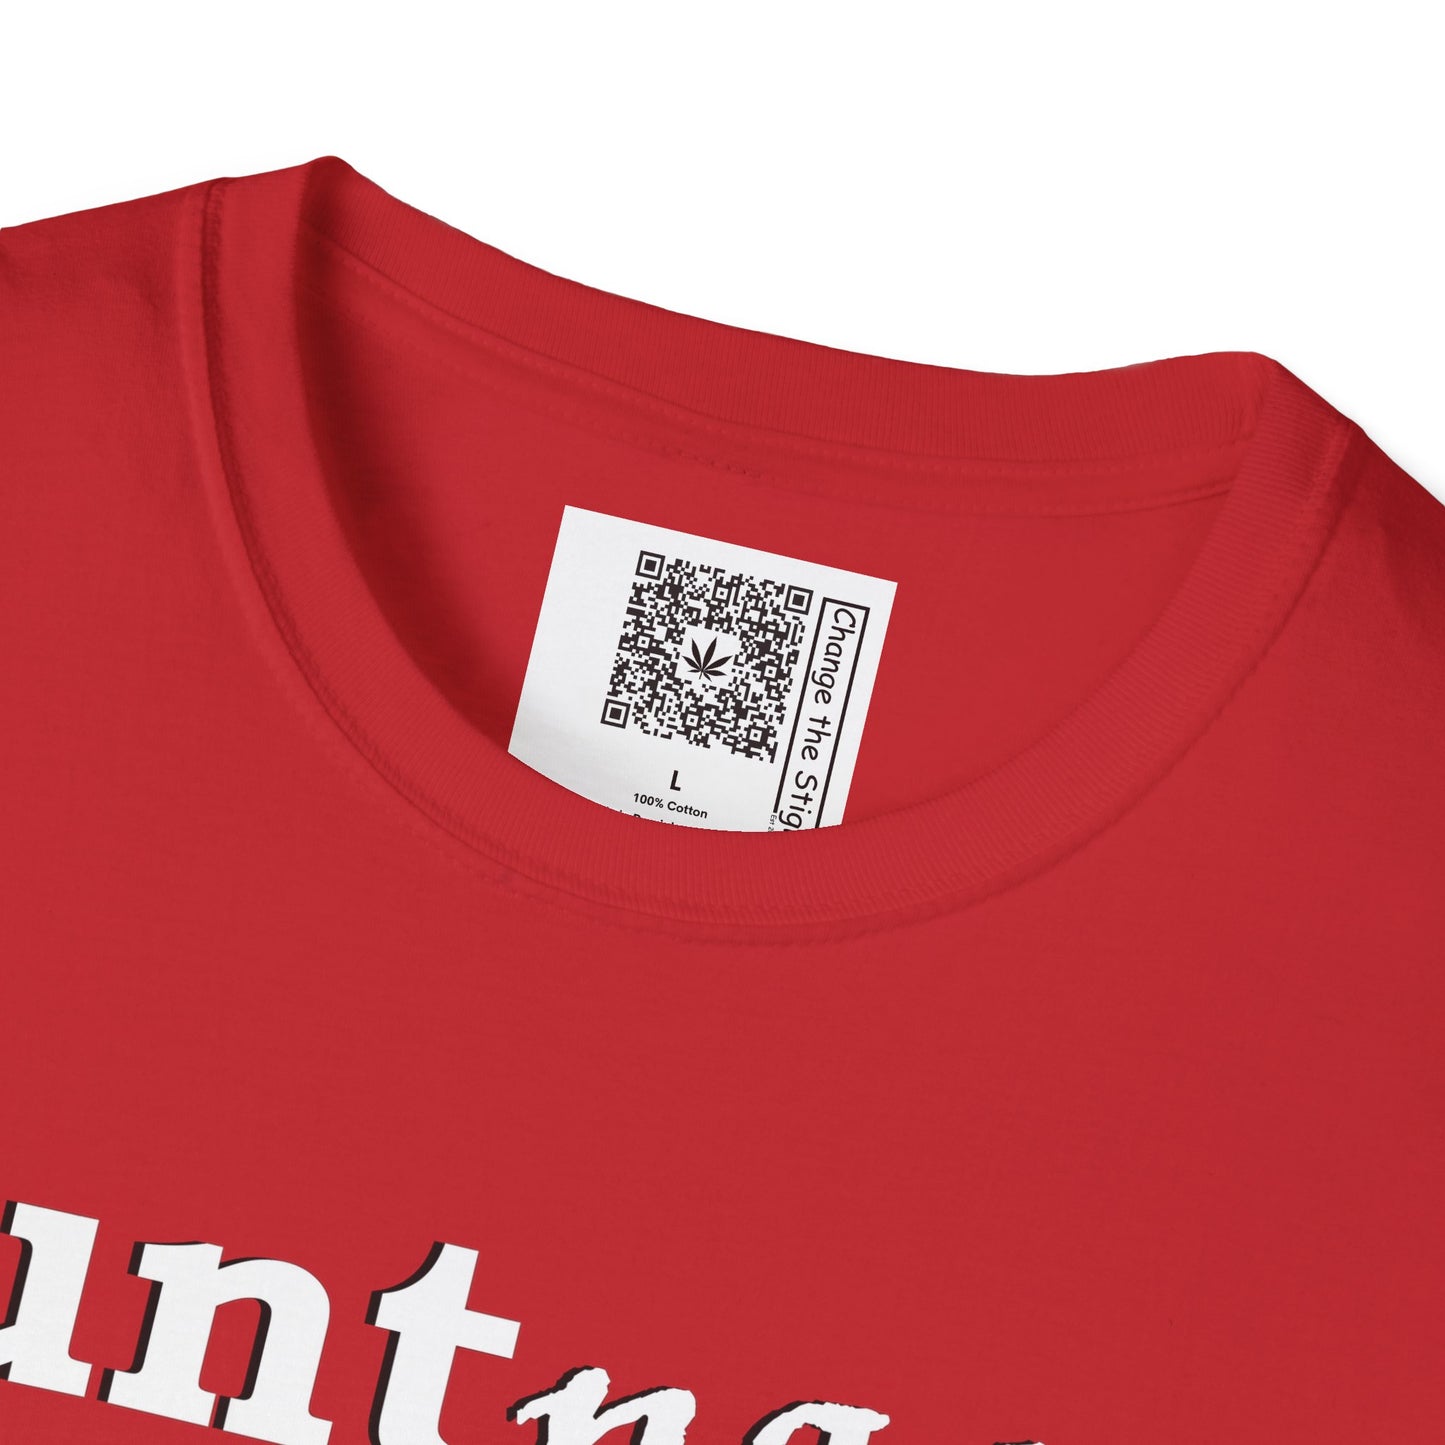 Change the Stigma, Red color, shirt saying "blunt passer", Shirt is open displayed, Qr code is shown neck tag